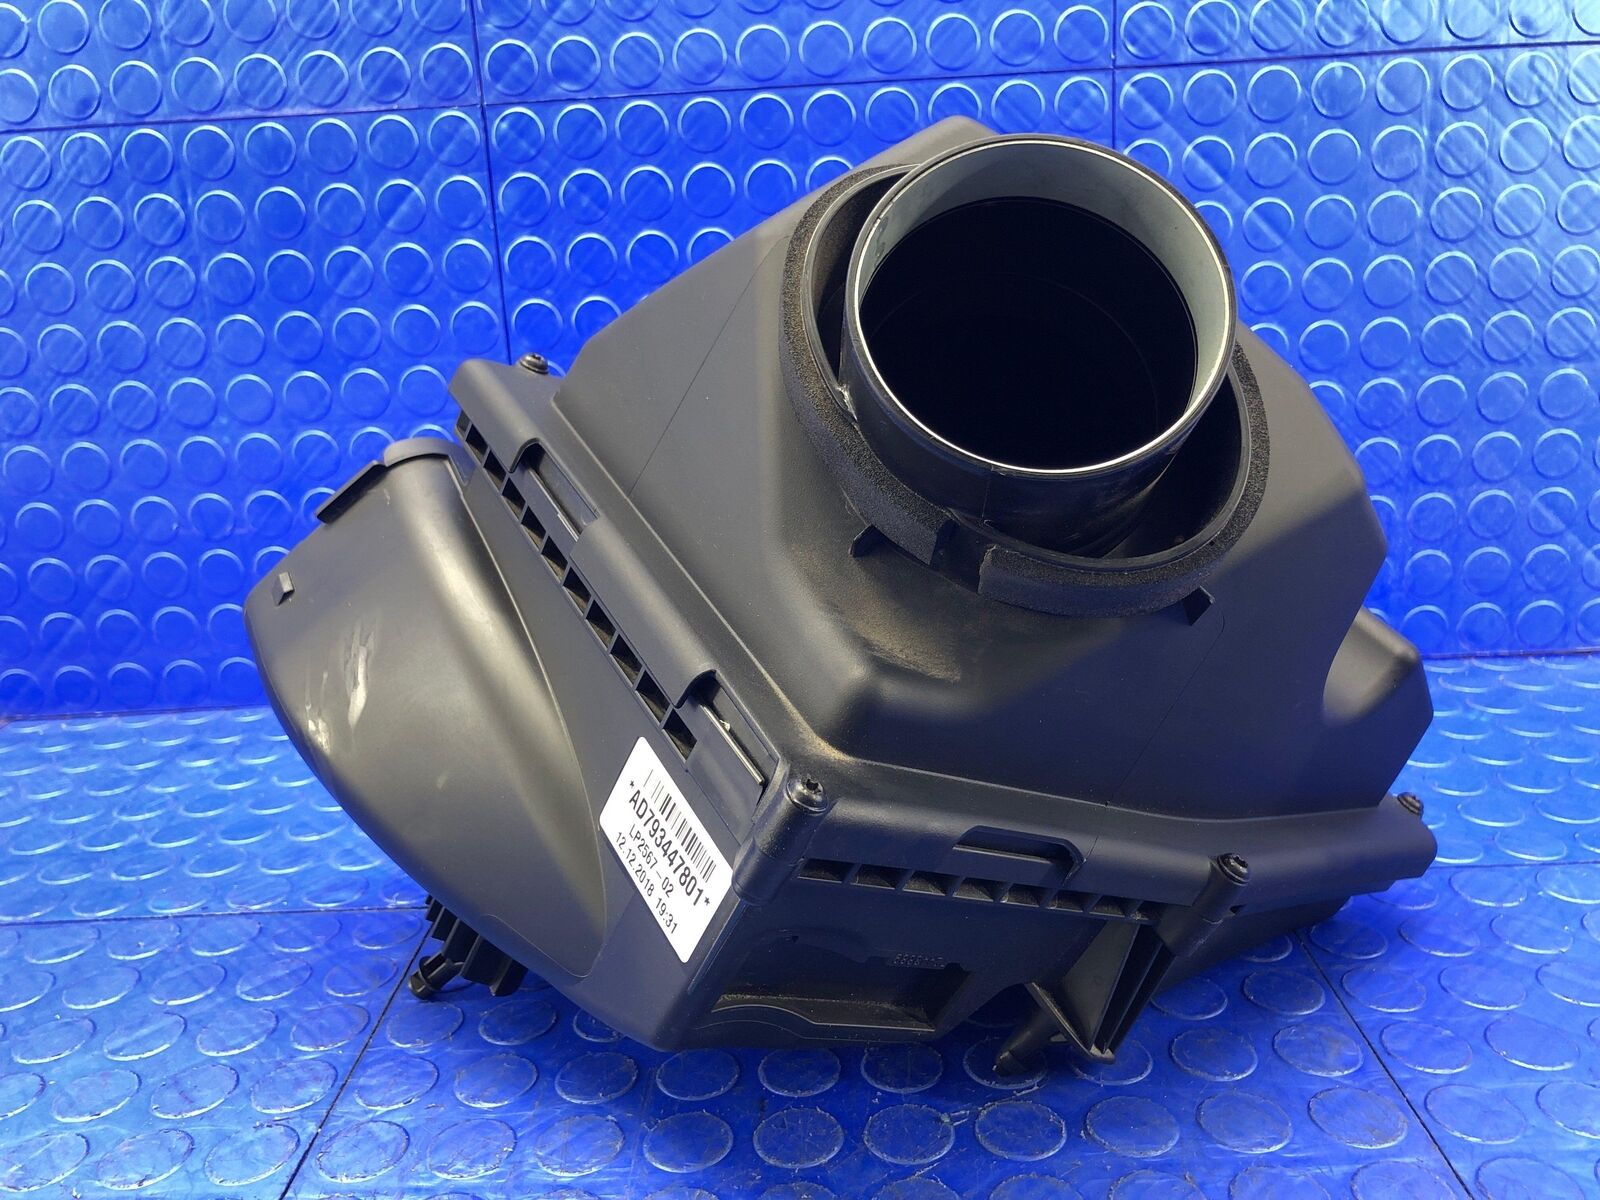 2019 BMW M850I OEM 4.4L RIGHT SIDE ENGINE AIR INTAKE CLEANER FILTER HOUSING BOX